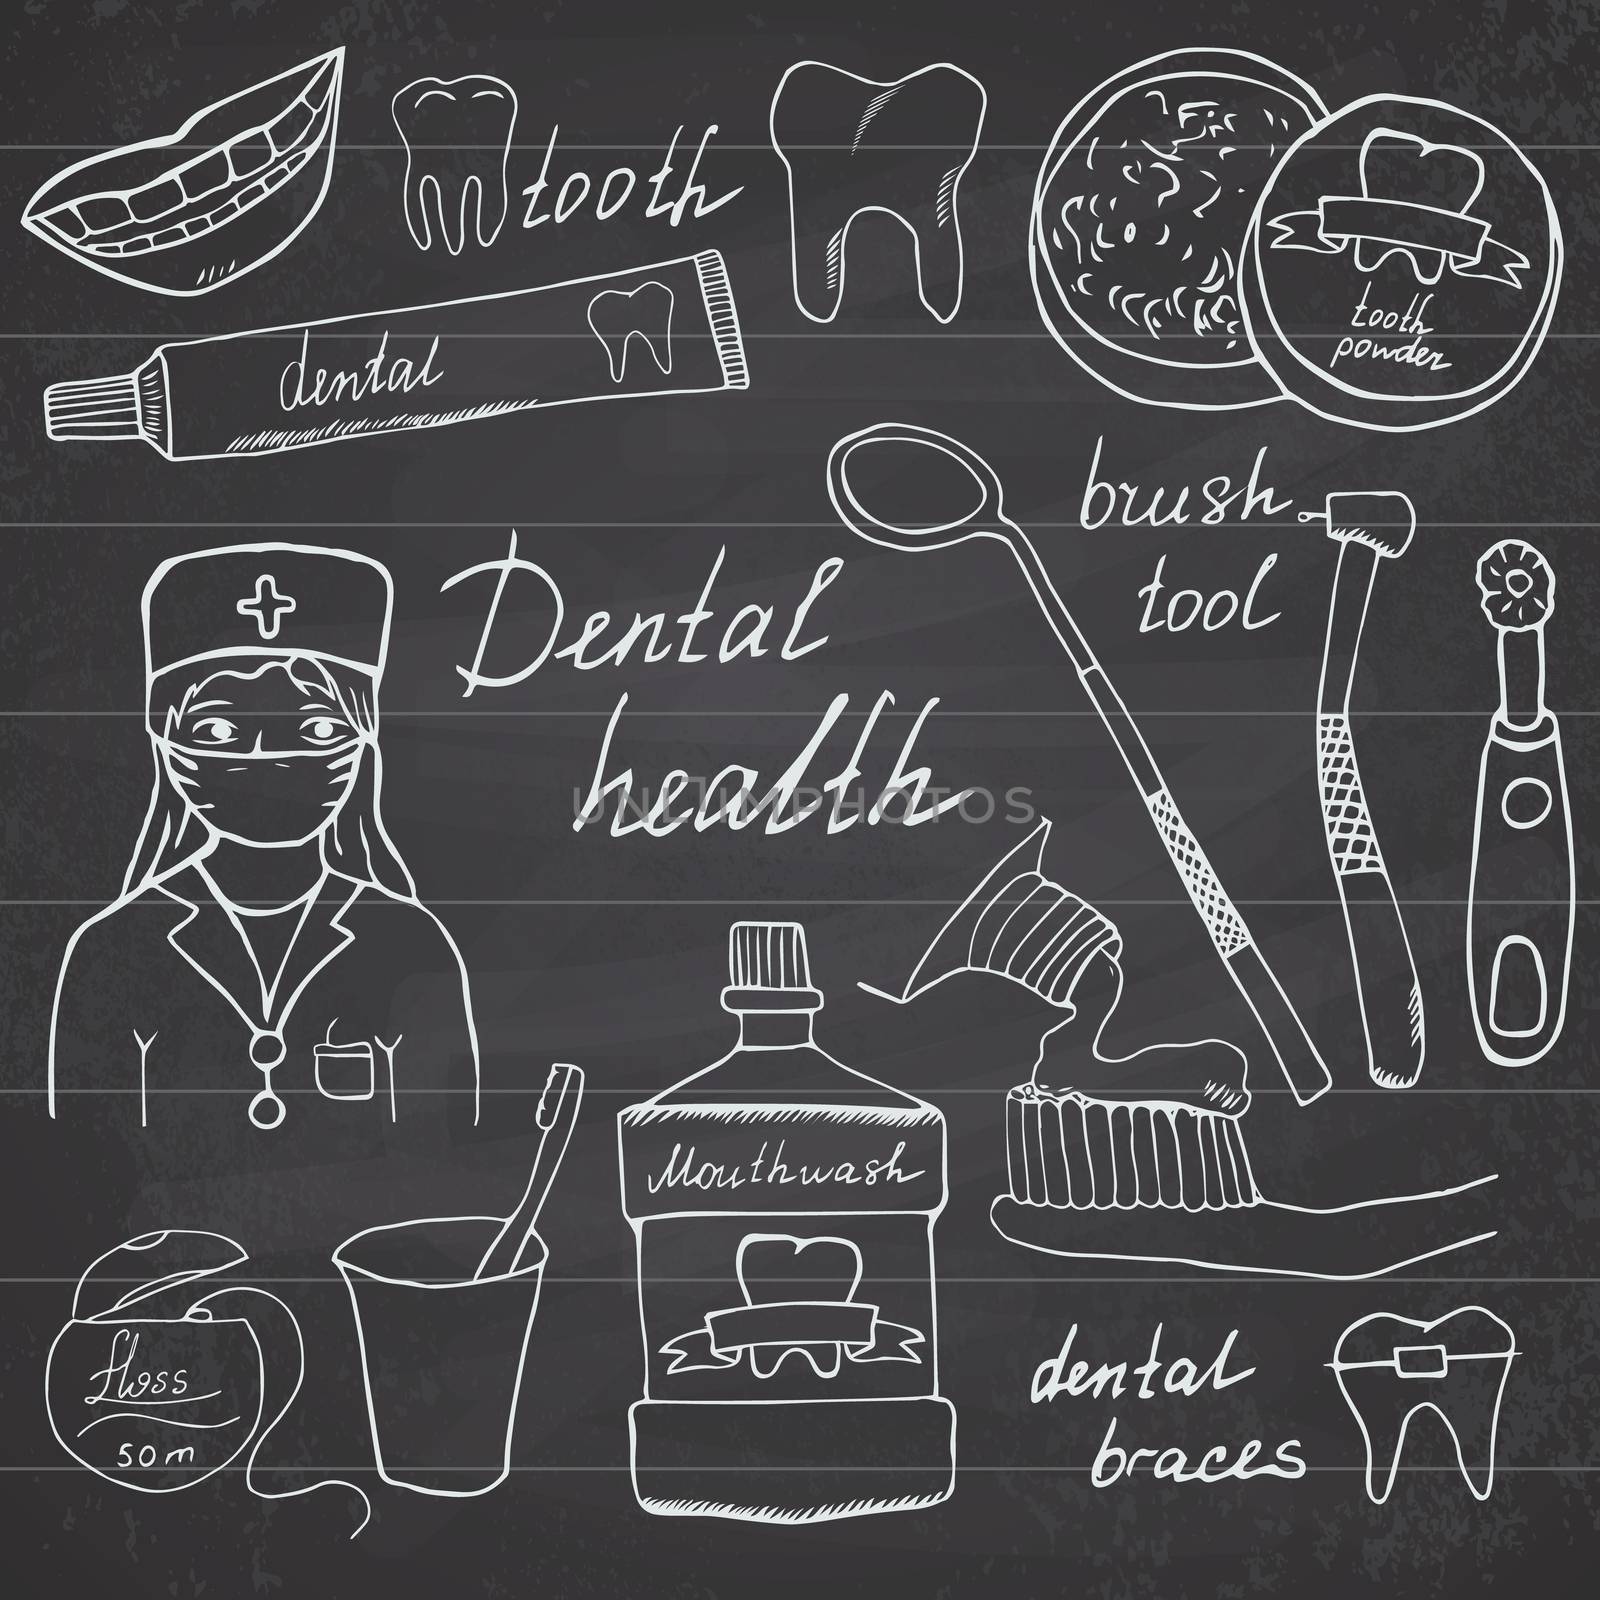 Dental health doodles icons set. Hand drawn sketch with teeth, toothpaste toothbrush dentist mouth wash and floss. vector illustration on chalkboard background by Lemon_workshop